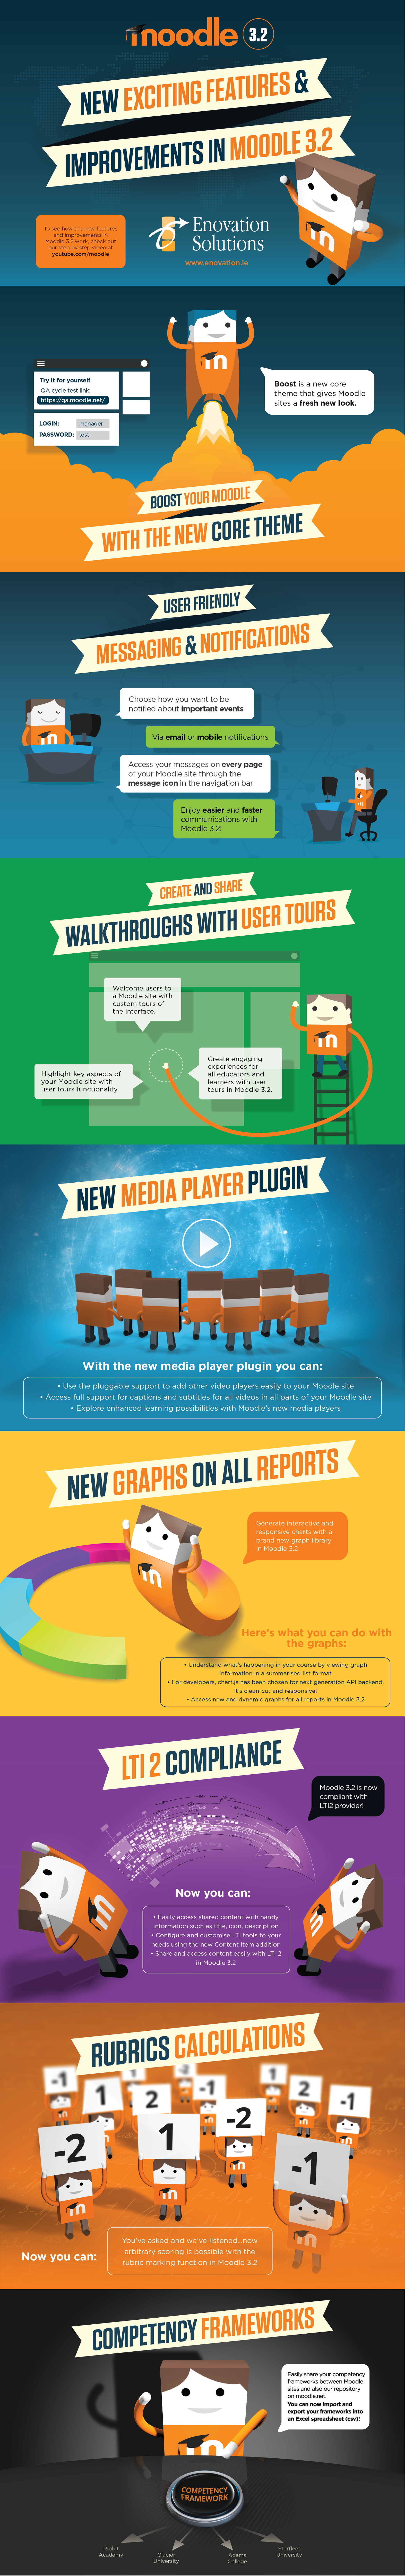 Moodle 3.2 Infographic